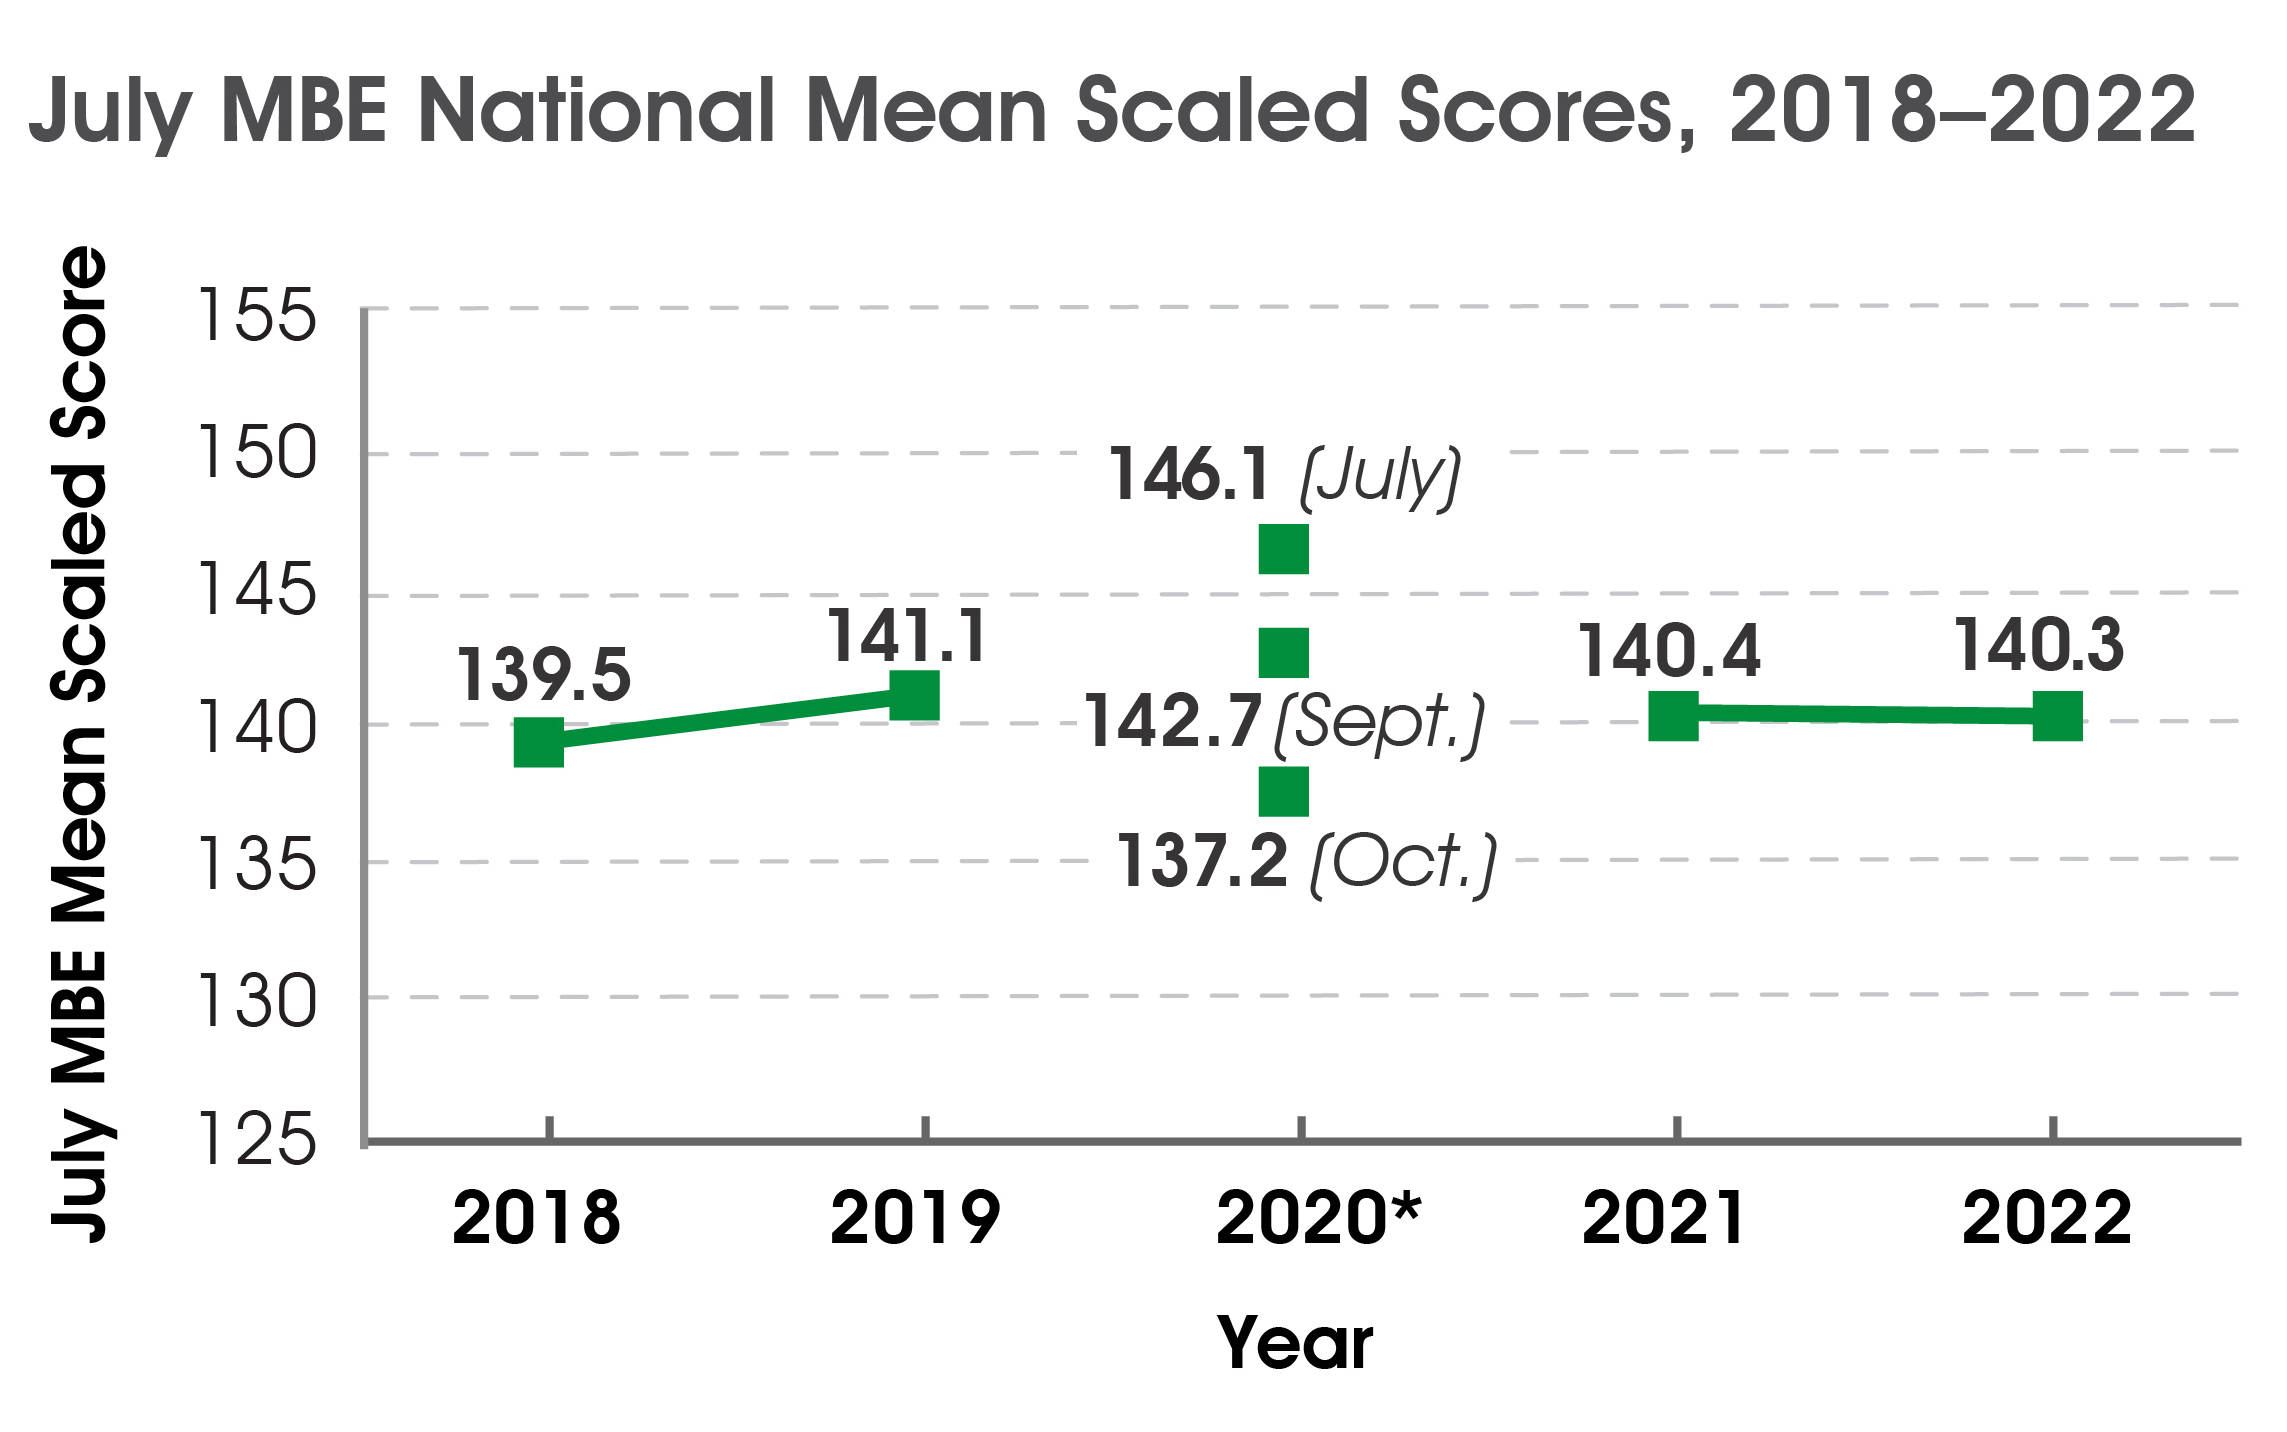 Bar graph of July MBE national examinee counts, 2018-2022. 2018 = 45,274; 2019 = 45,334; 2020 = 5,678 (July), 1,811 (Sept.), 417 (Oct.); 2021 = 45,872; 2022 = 44,705.